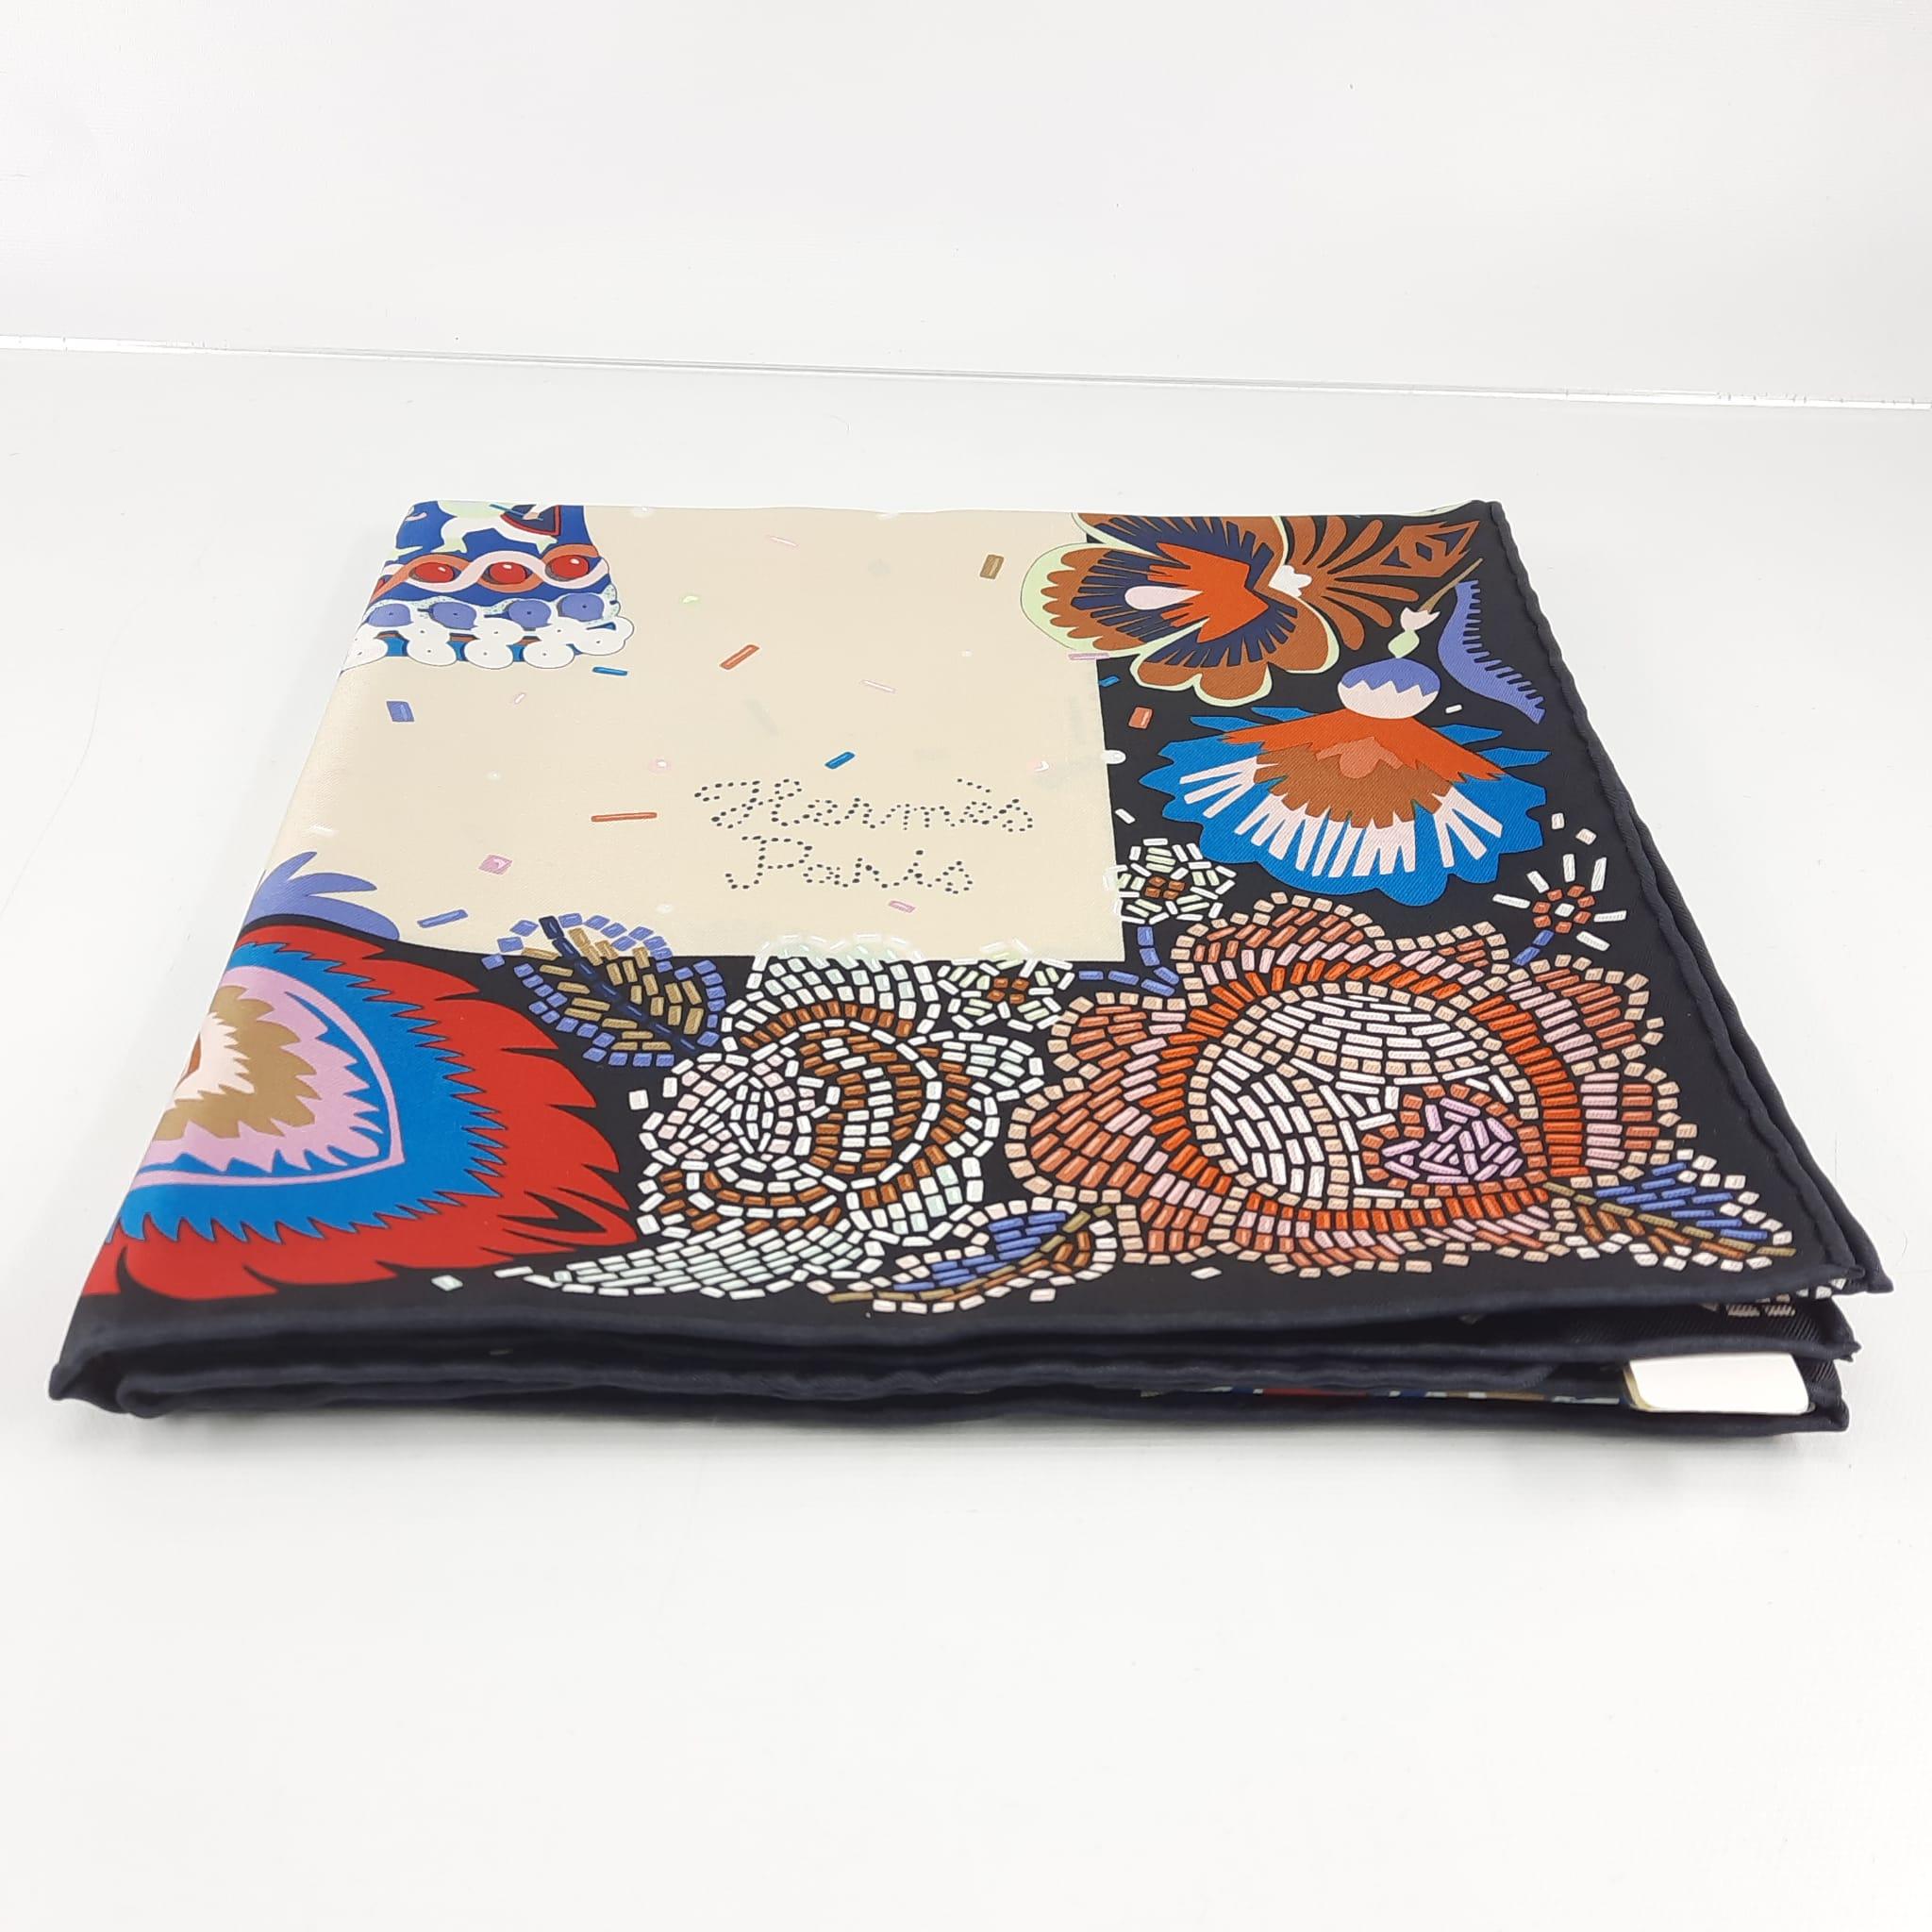 Scarf in silk twill with hand-rolled edges
This essential Hermès accessory complements any outfit. It can be worn many ways - around your neck, as a top, at the waist or as a headscarf!
The Hermès scarf is an infinite source of creativity and